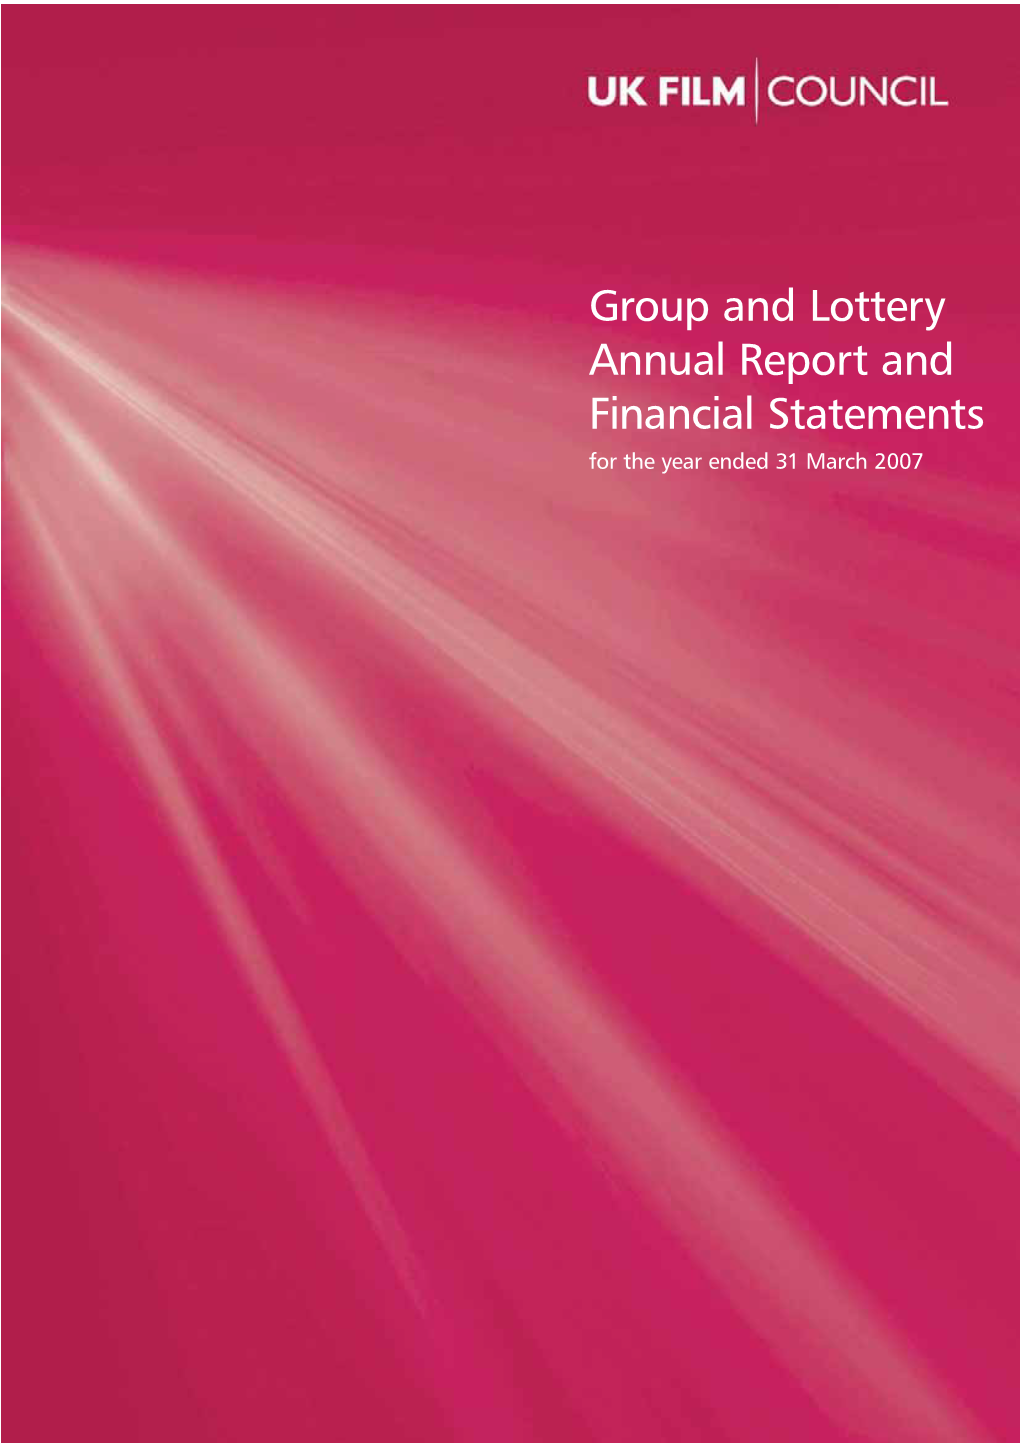 UK Film Council Group and Lottery Annual Report and Financial Statements 2006/07